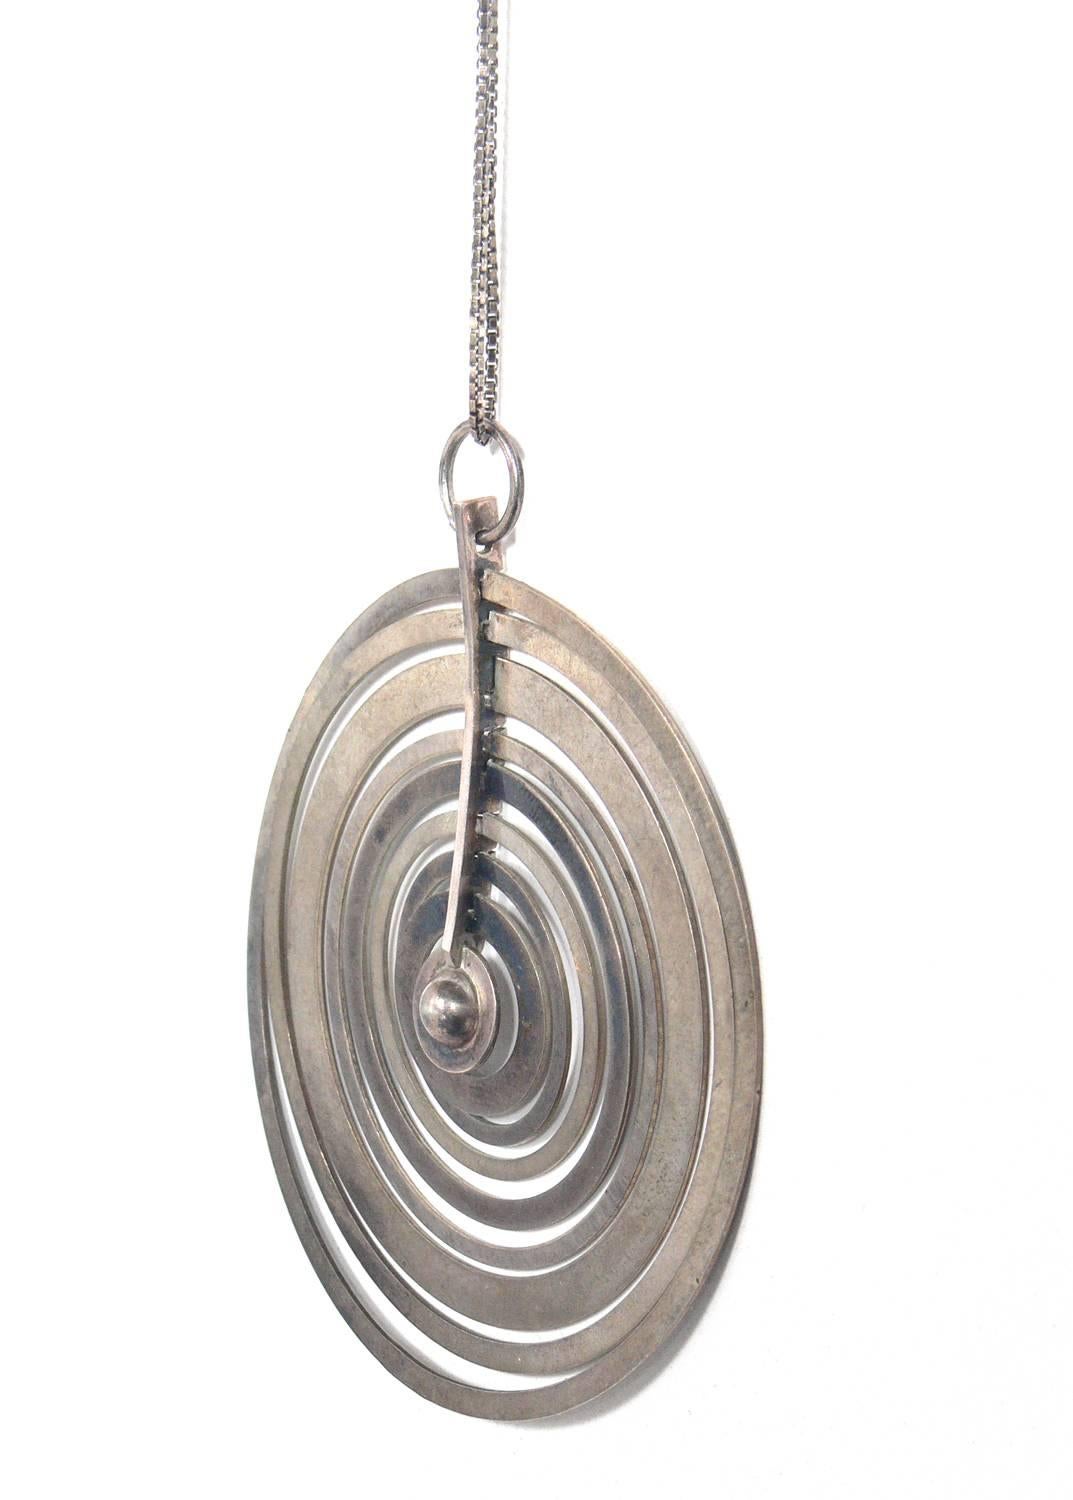 Sculptural sterling silver pendant necklace, designed by Tapio Wirkkala for Nils Westerback Oy, Finland, circa 1971. Signed with impressed manufacturer's mark and touchmarks to reverse: [NW 925H Assay Marks for Finland T7]. Literature: Tapio